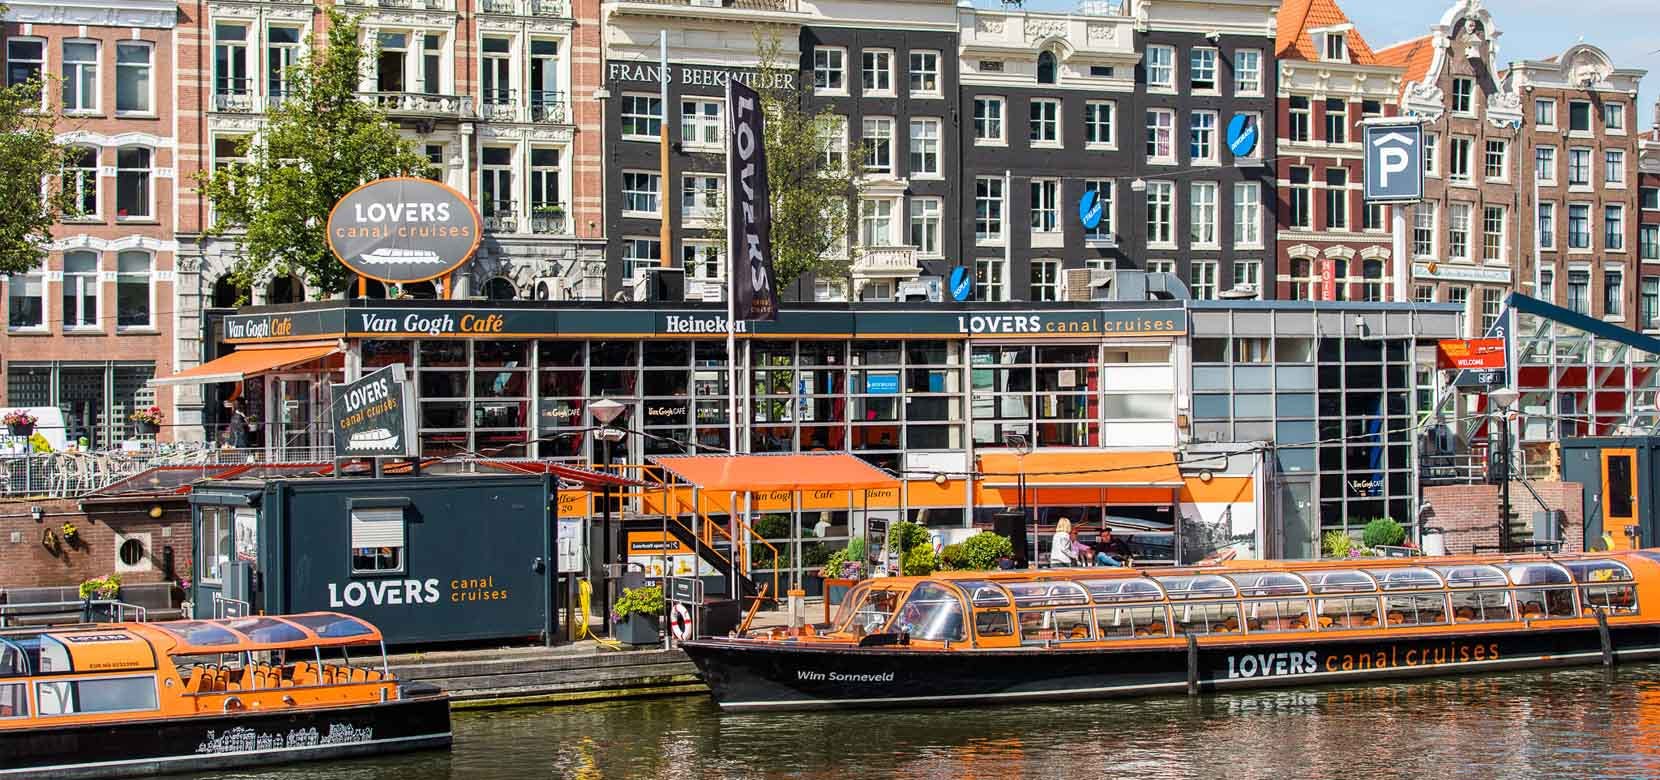 LOVERS Canal Cruises - Amsterdam Canal Cruise